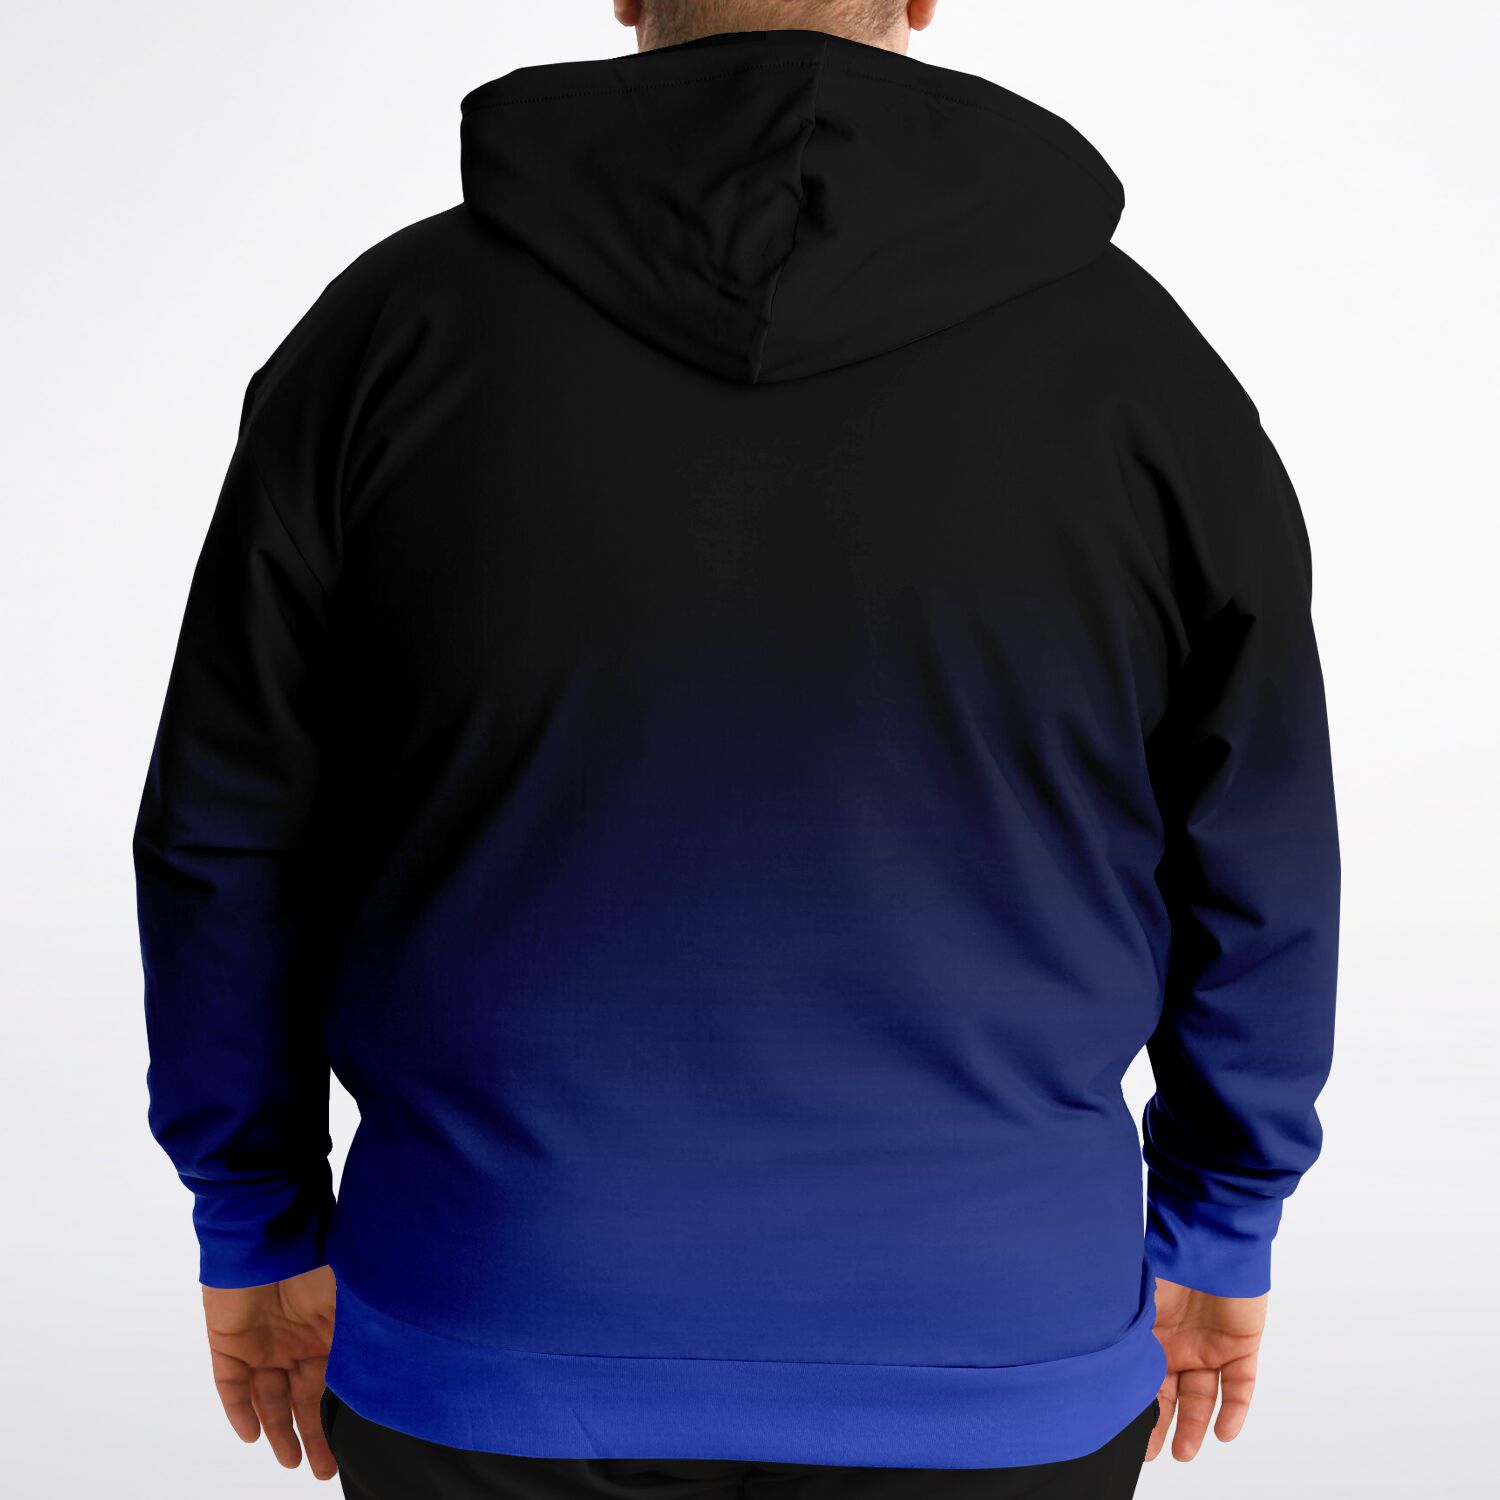 FrozenHeart High Quality Athletic Plus-size Hoodie - AMCThorn Art